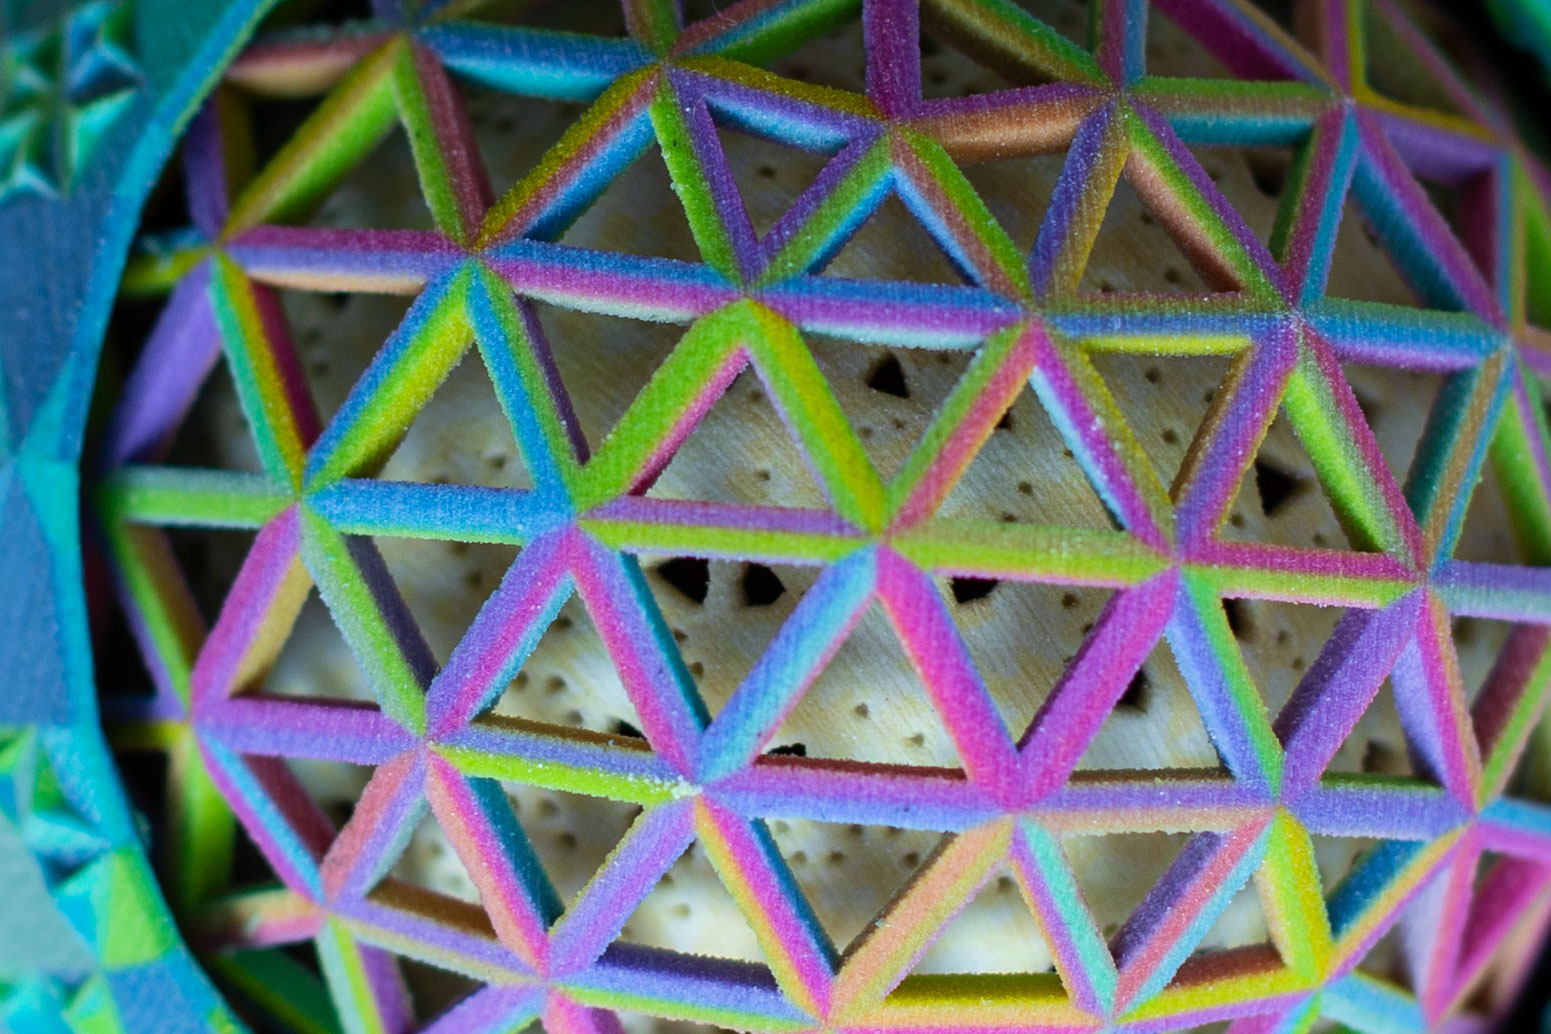 Detail of the 3D printed sculpture